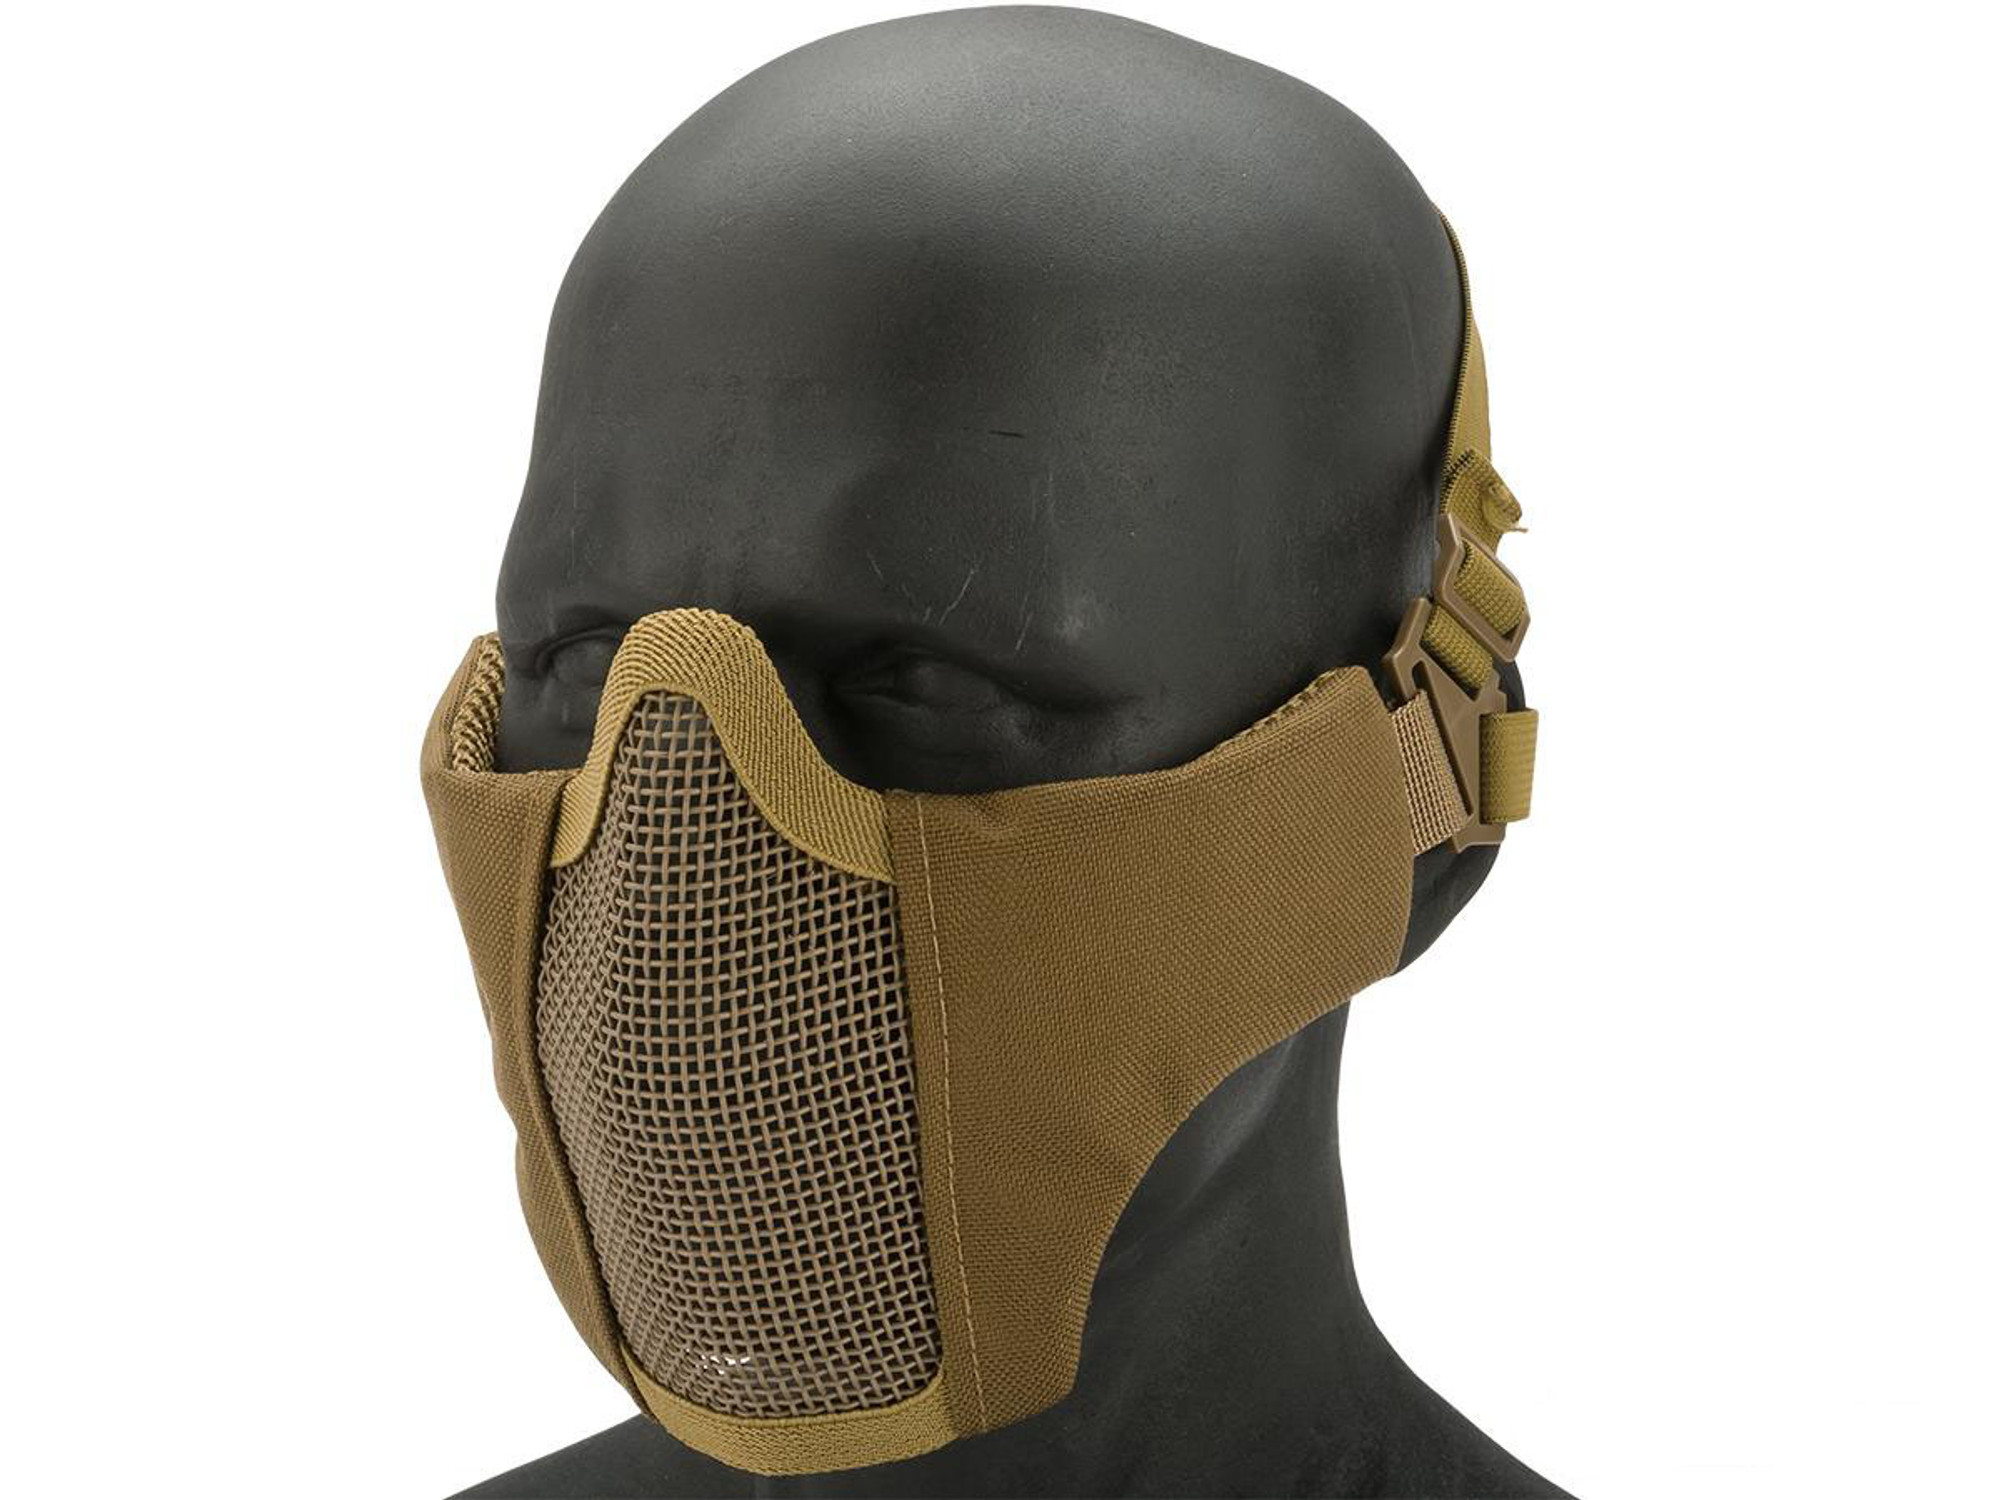 Matrix Low Profile Iron Face Padded Lower Half Face Mask (Color: Tan)